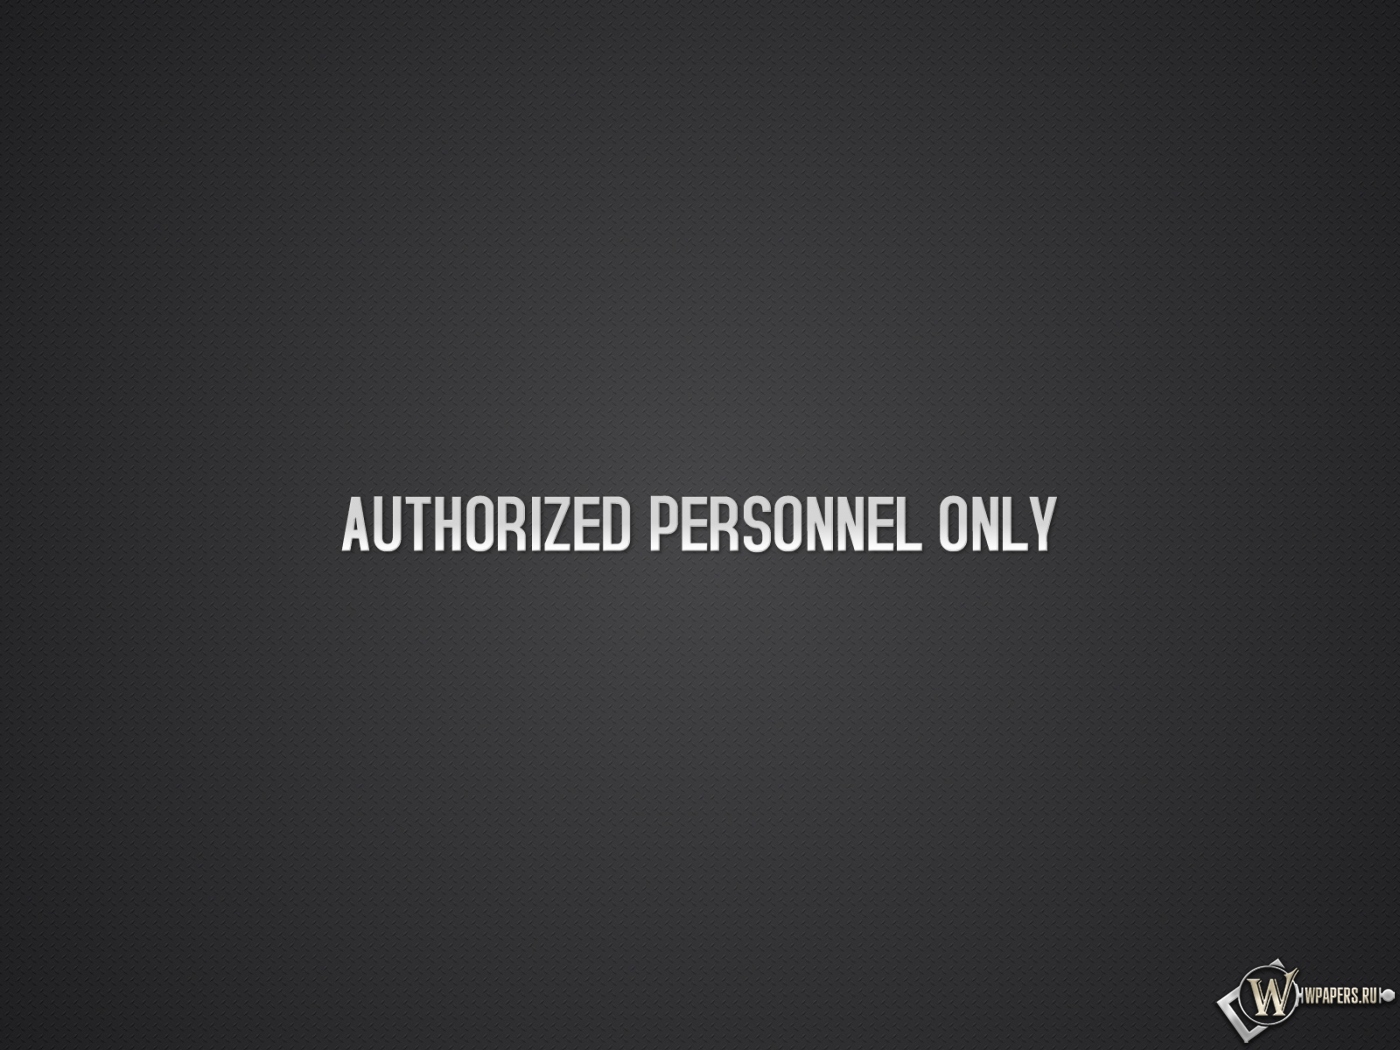 Authorized personnel only 1400x1050